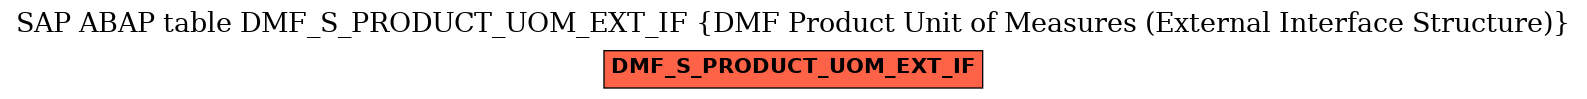 E-R Diagram for table DMF_S_PRODUCT_UOM_EXT_IF (DMF Product Unit of Measures (External Interface Structure))